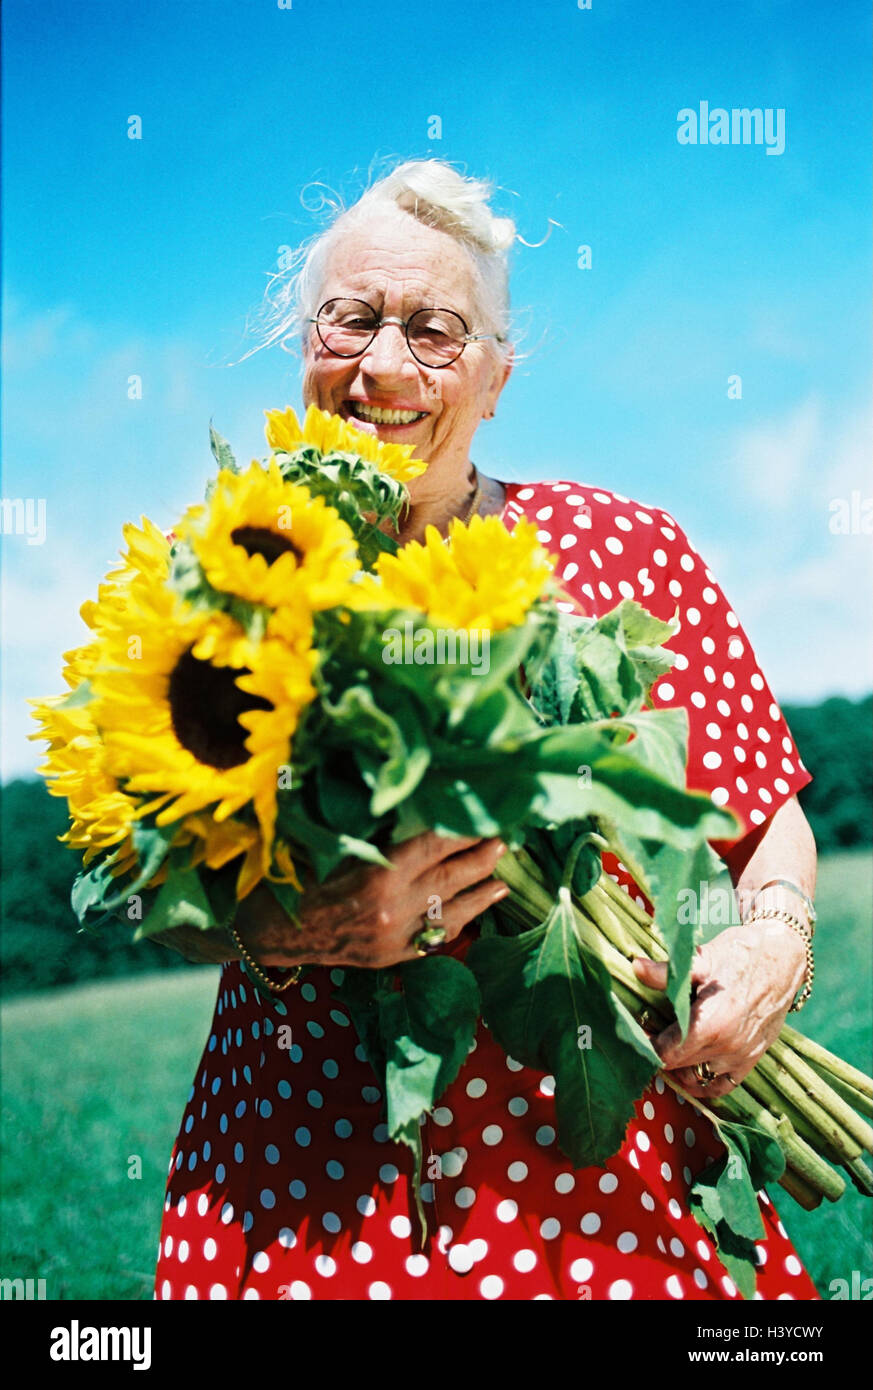 Senior, bouquet, sunflowers, half portrait, old person, woman, old, glasses, happy, smile, flowers, summer dress, summer, outside Stock Photo